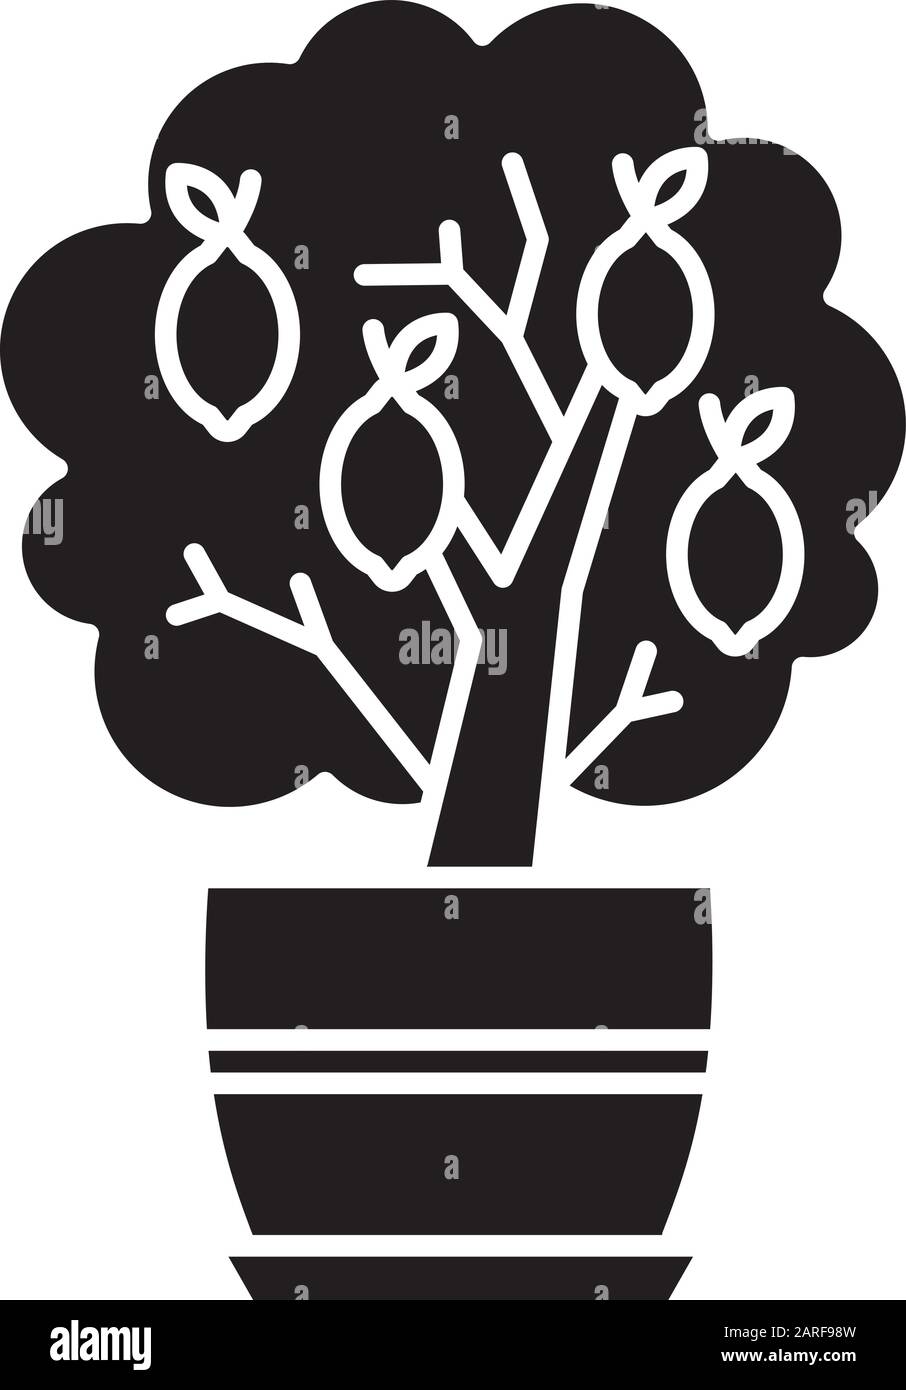 Miniature lemon tree black glyph icon. Potted evergreen citrus. Indoor plant with yellow fruit. Decorative fruiting houseplant. Silhouette symbol on w Stock Vector